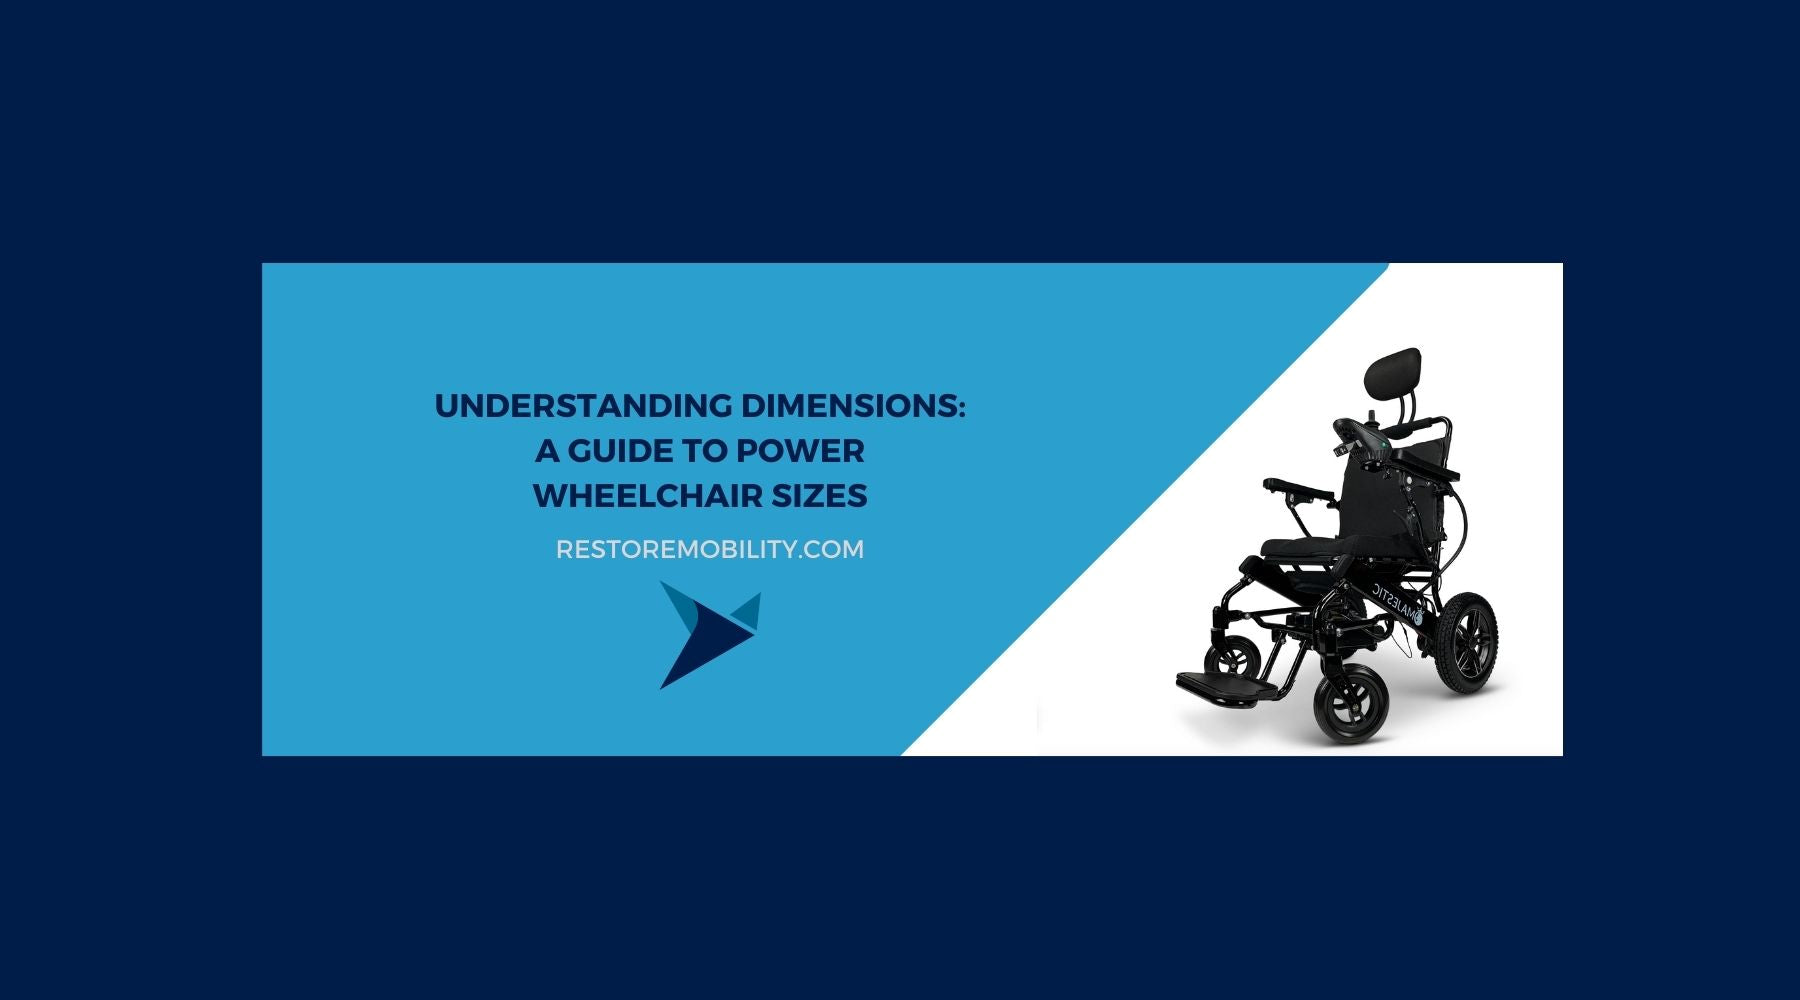 Understanding Dimensions: A Guide to Power Wheelchair Sizes